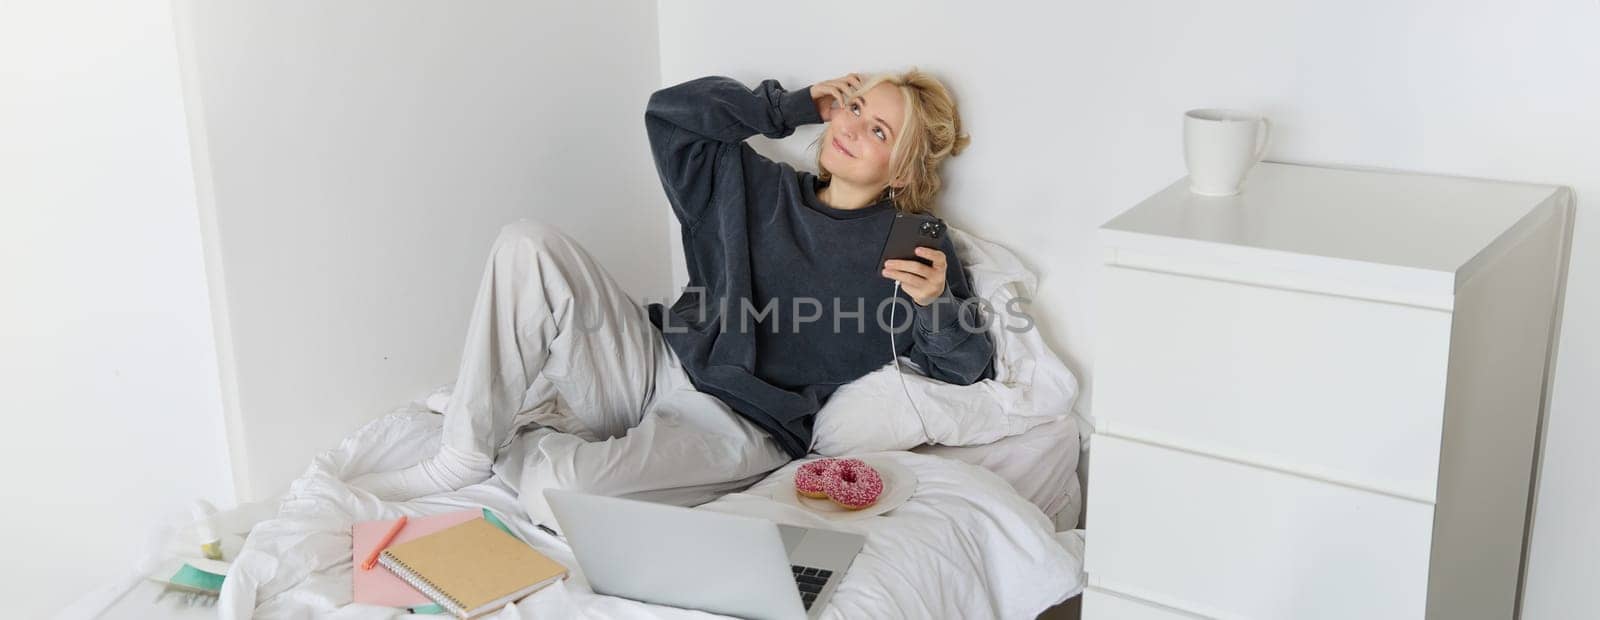 Lifestyle and weekend concept. Young smiling woman, relaxing at home, lying in bed with cup of tea and doughnut, using laptop and smartphone in bedroom.